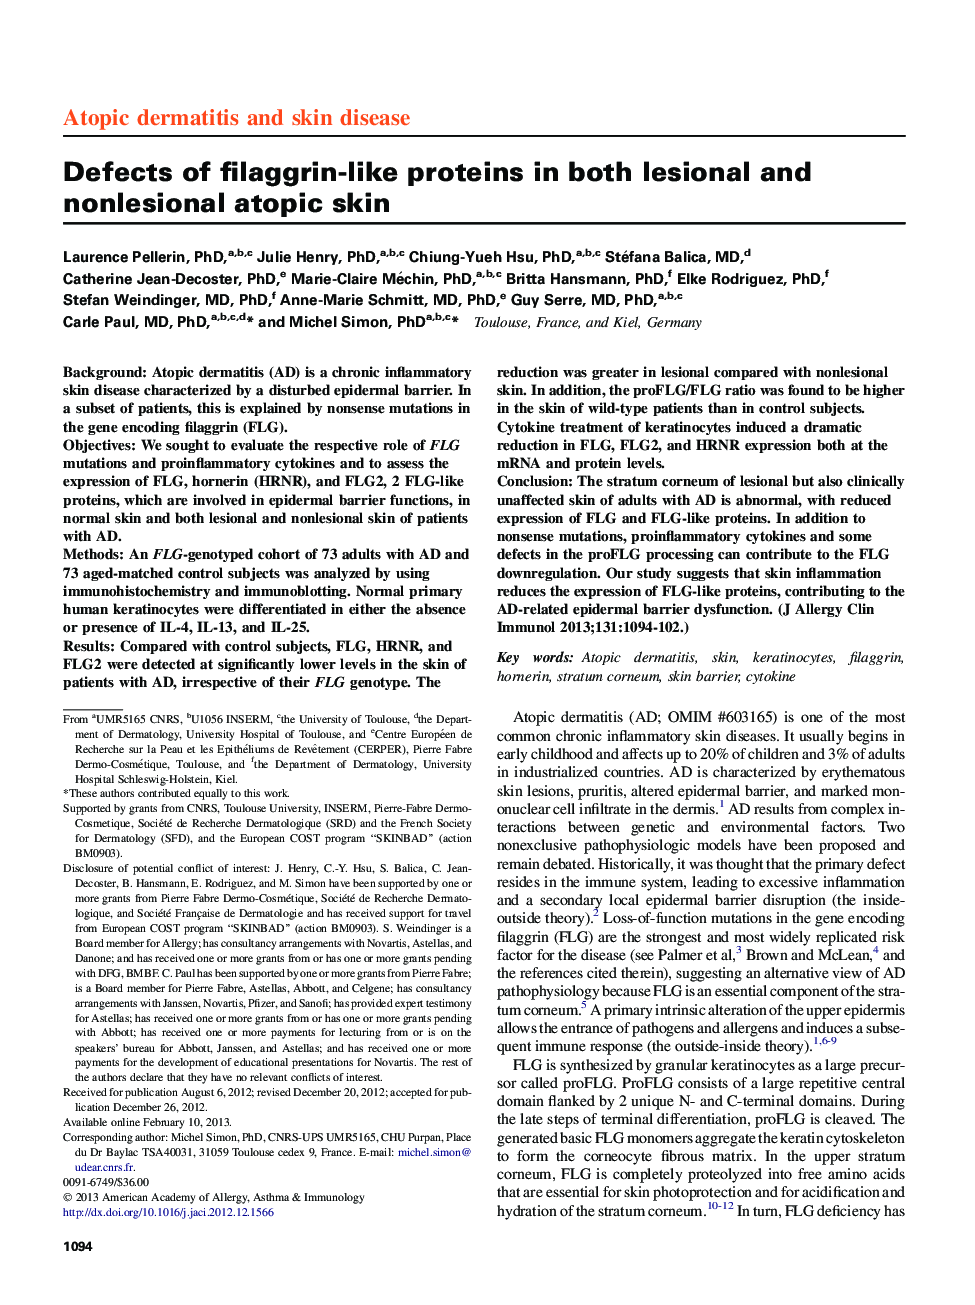 Defects of filaggrin-like proteins in both lesional and nonlesional atopic skin